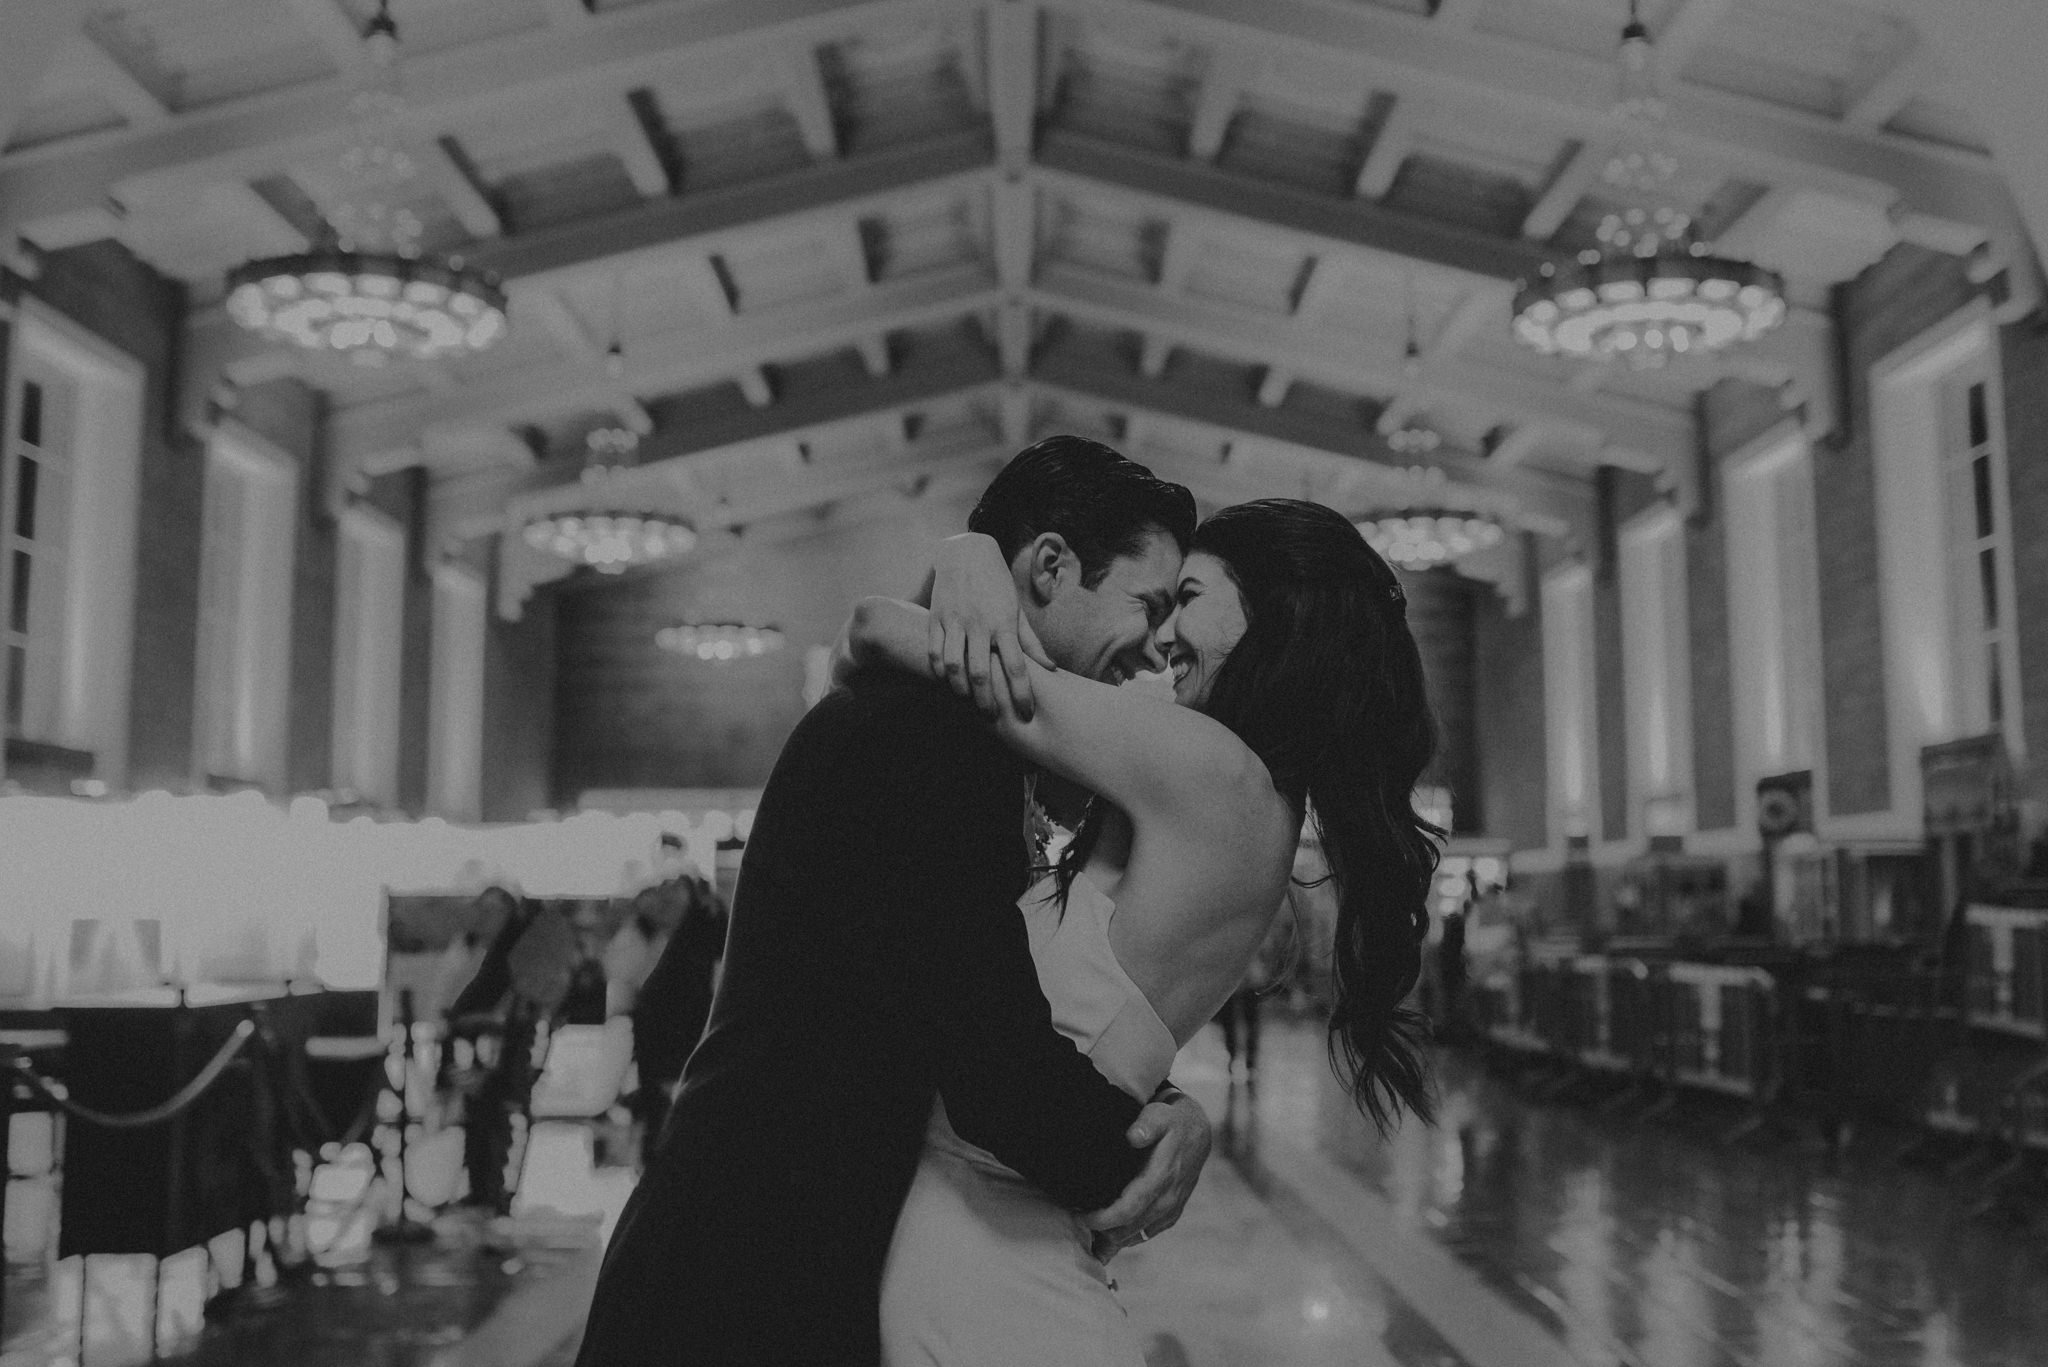 union station home bound brewery wedding - wedding photographers in los angeles - itlaphoto.com-113.jpg